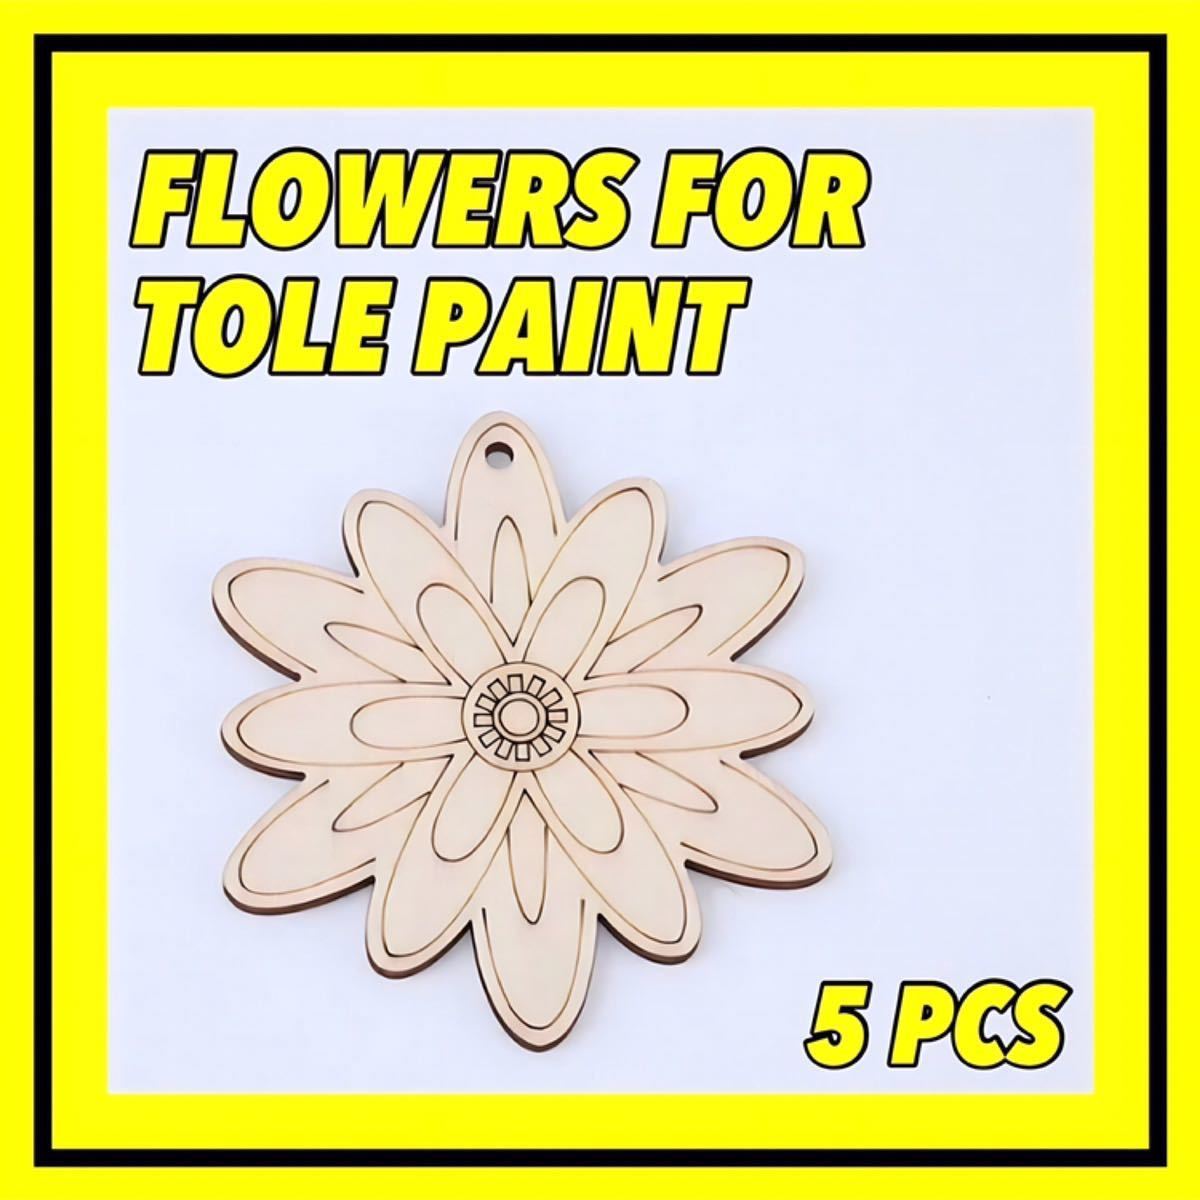 Tole painting, flowers, handmade, plain wood, materials, hobby, wall decoration, interior, ornament, unused item, Handmade items, interior, miscellaneous goods, ornament, object